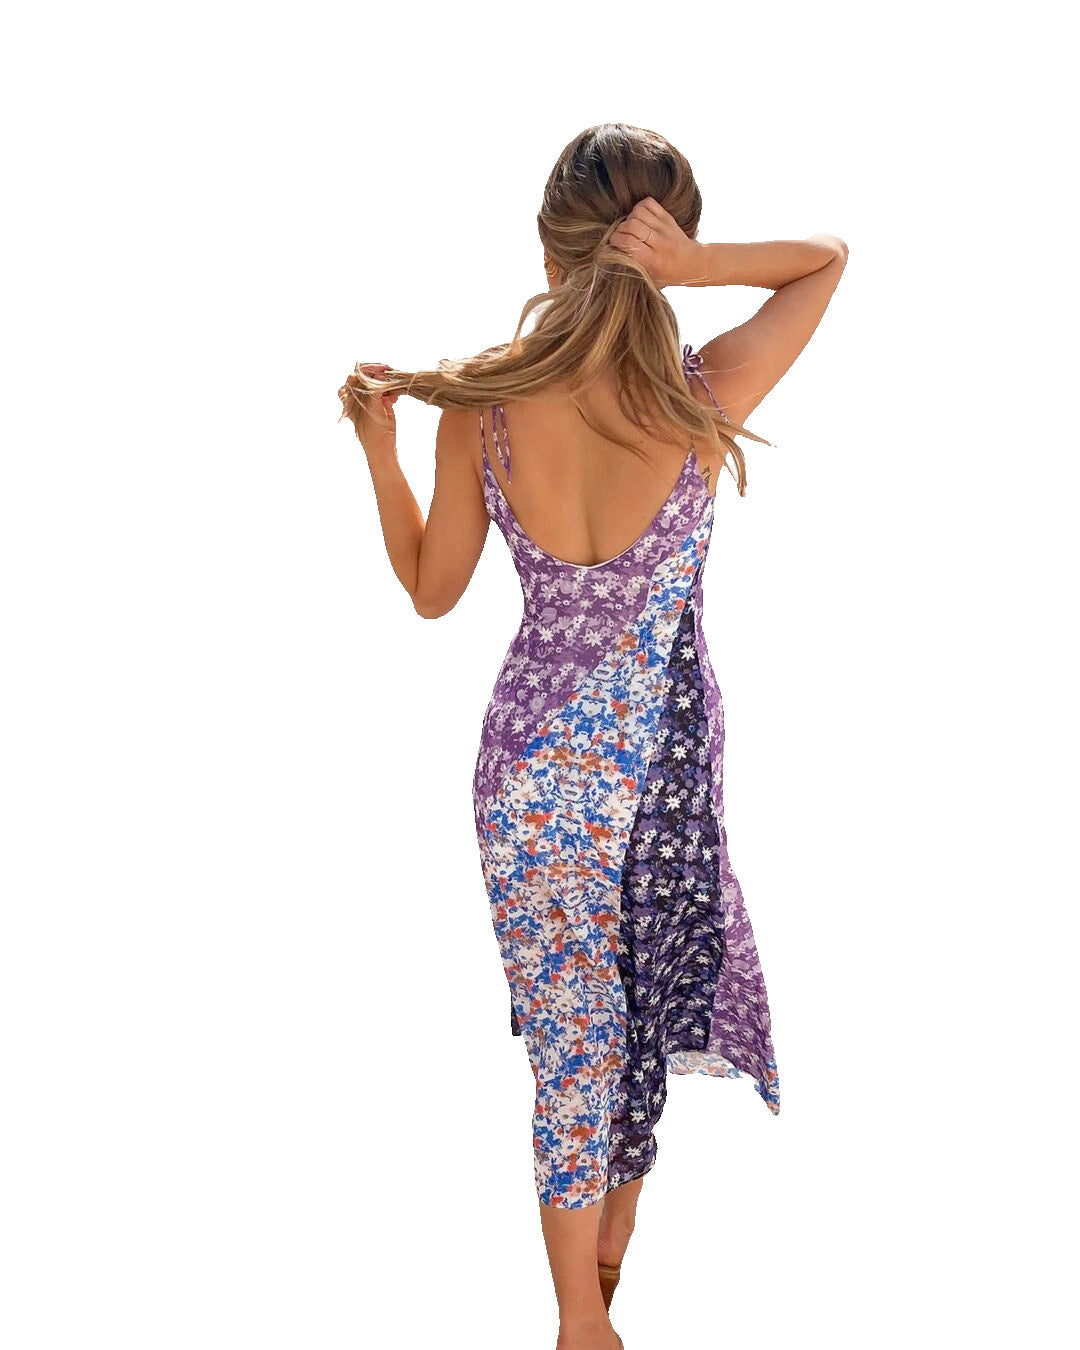 A woman wearing a Purple Floral Mid Summer Dress from Beachy Cover Ups appears comfortable.